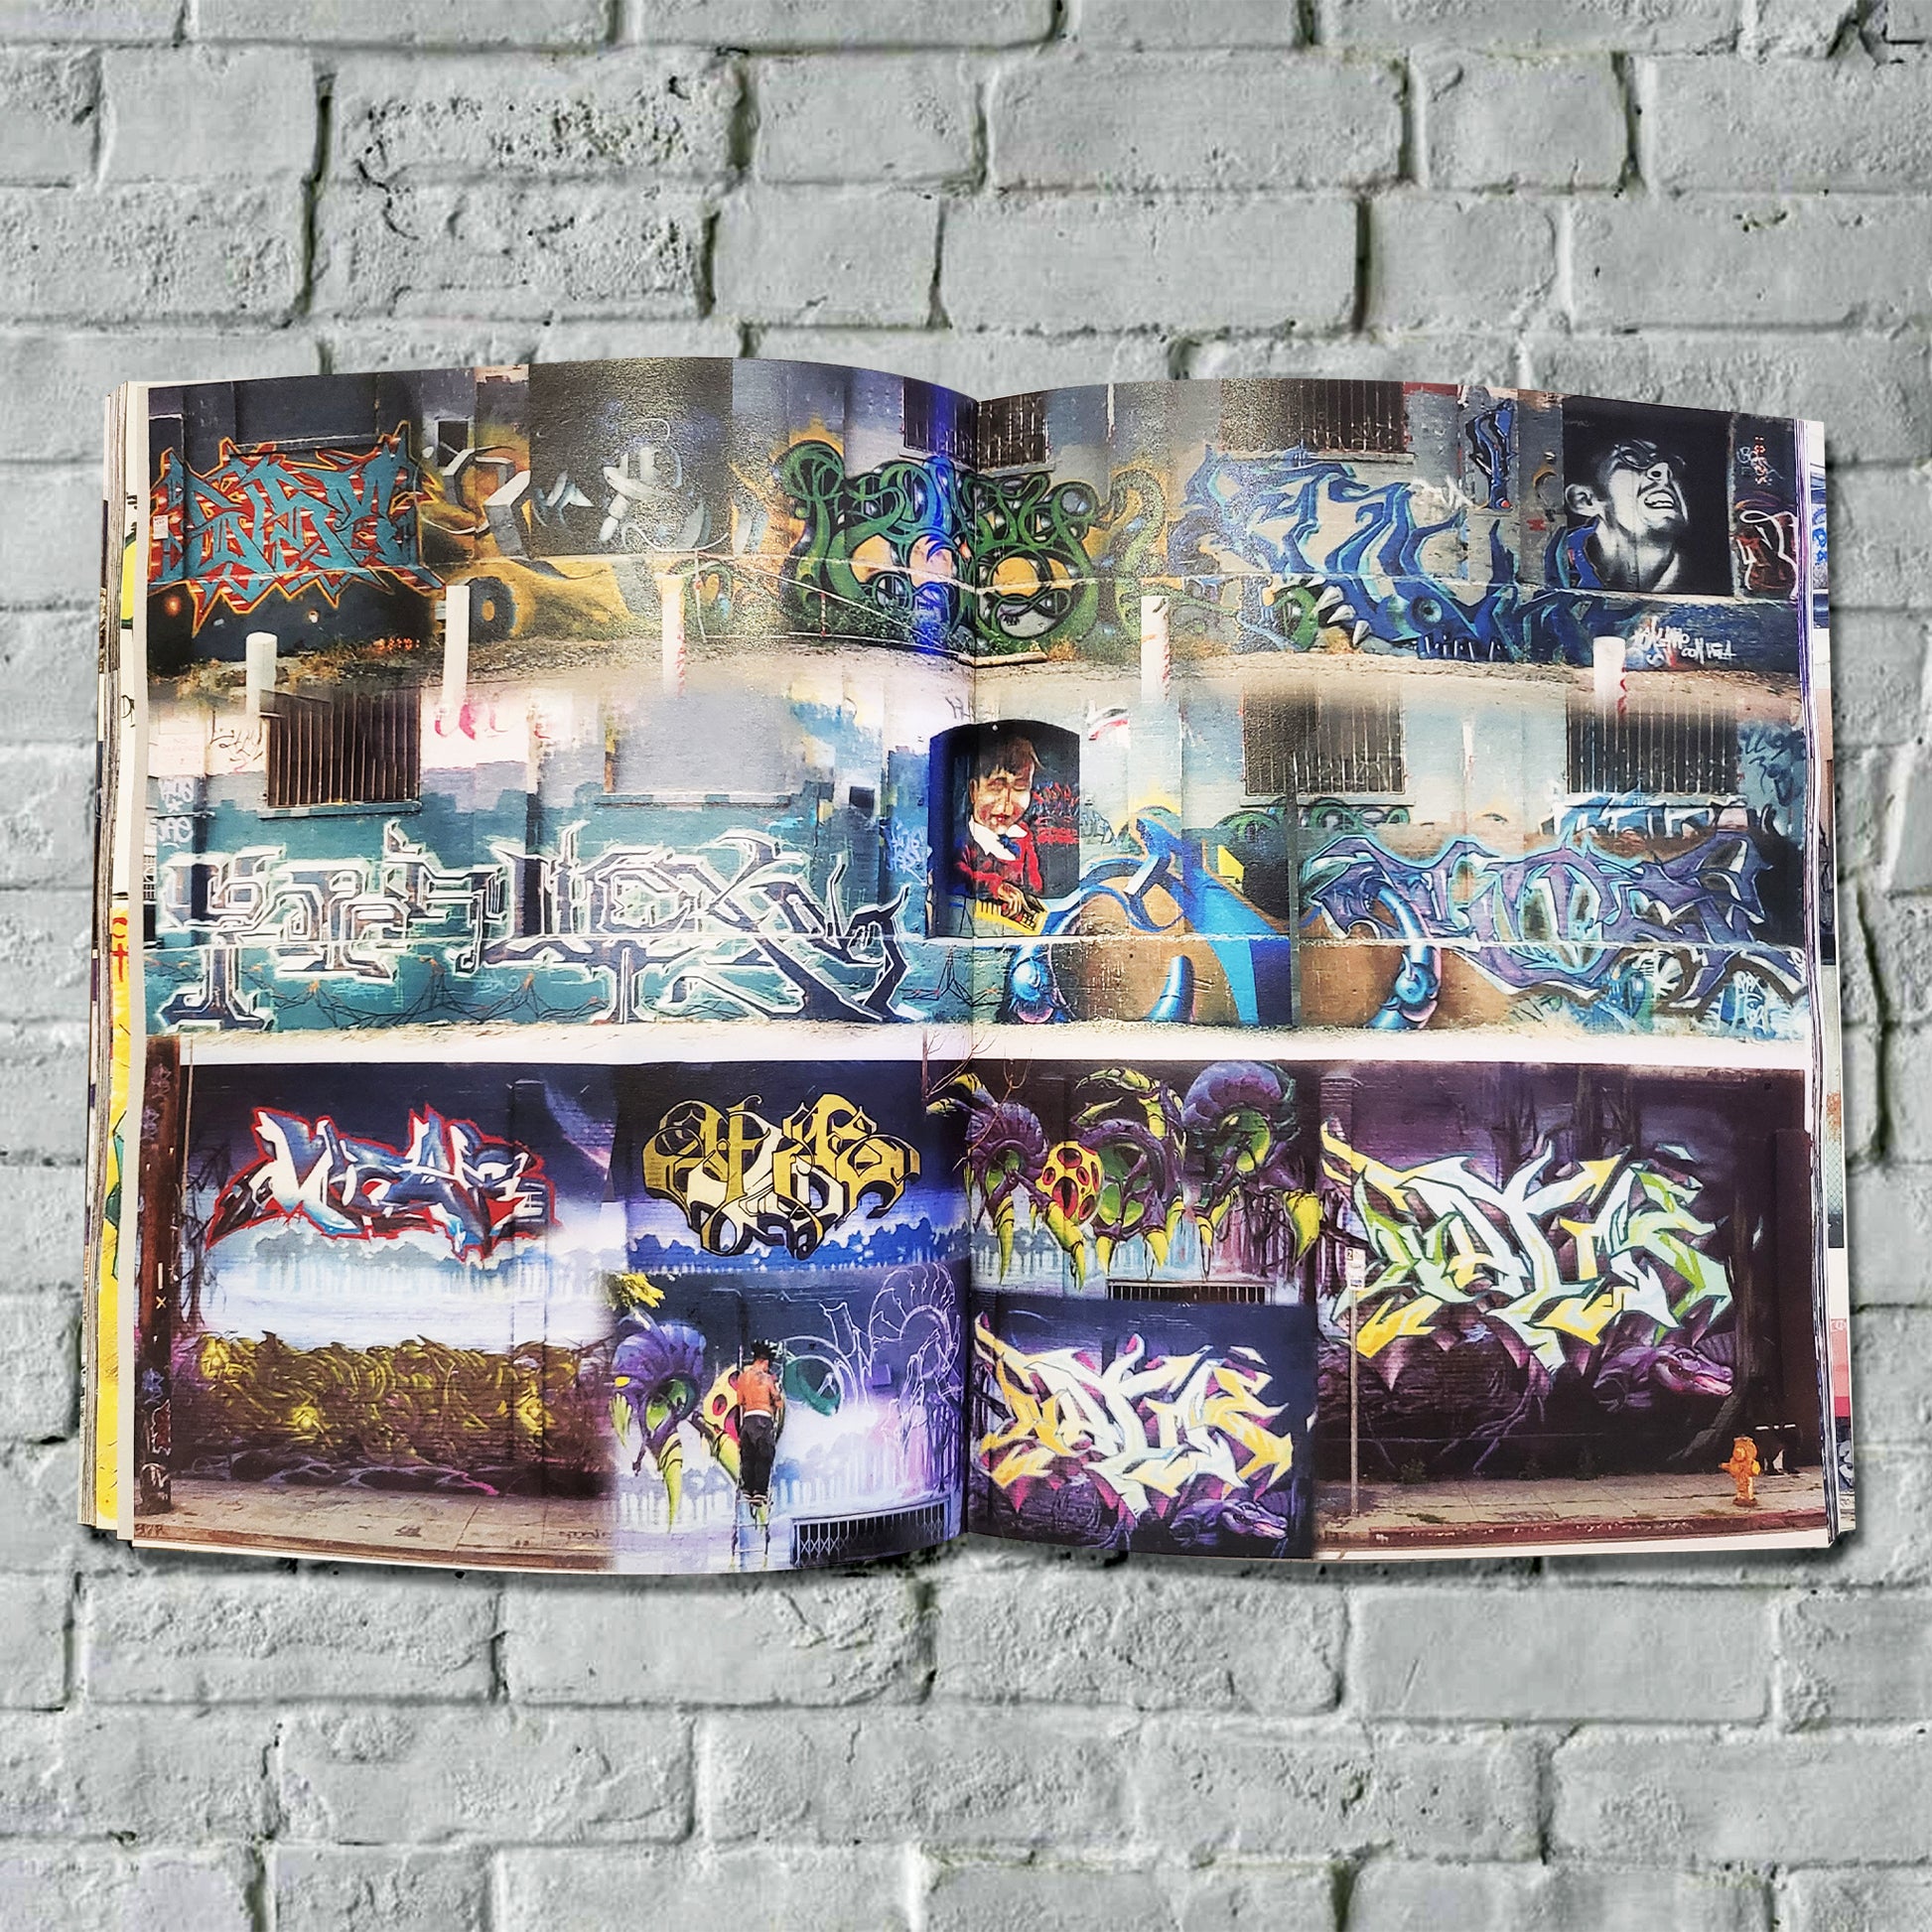 An open magazine with pictures of graffiti on walls.